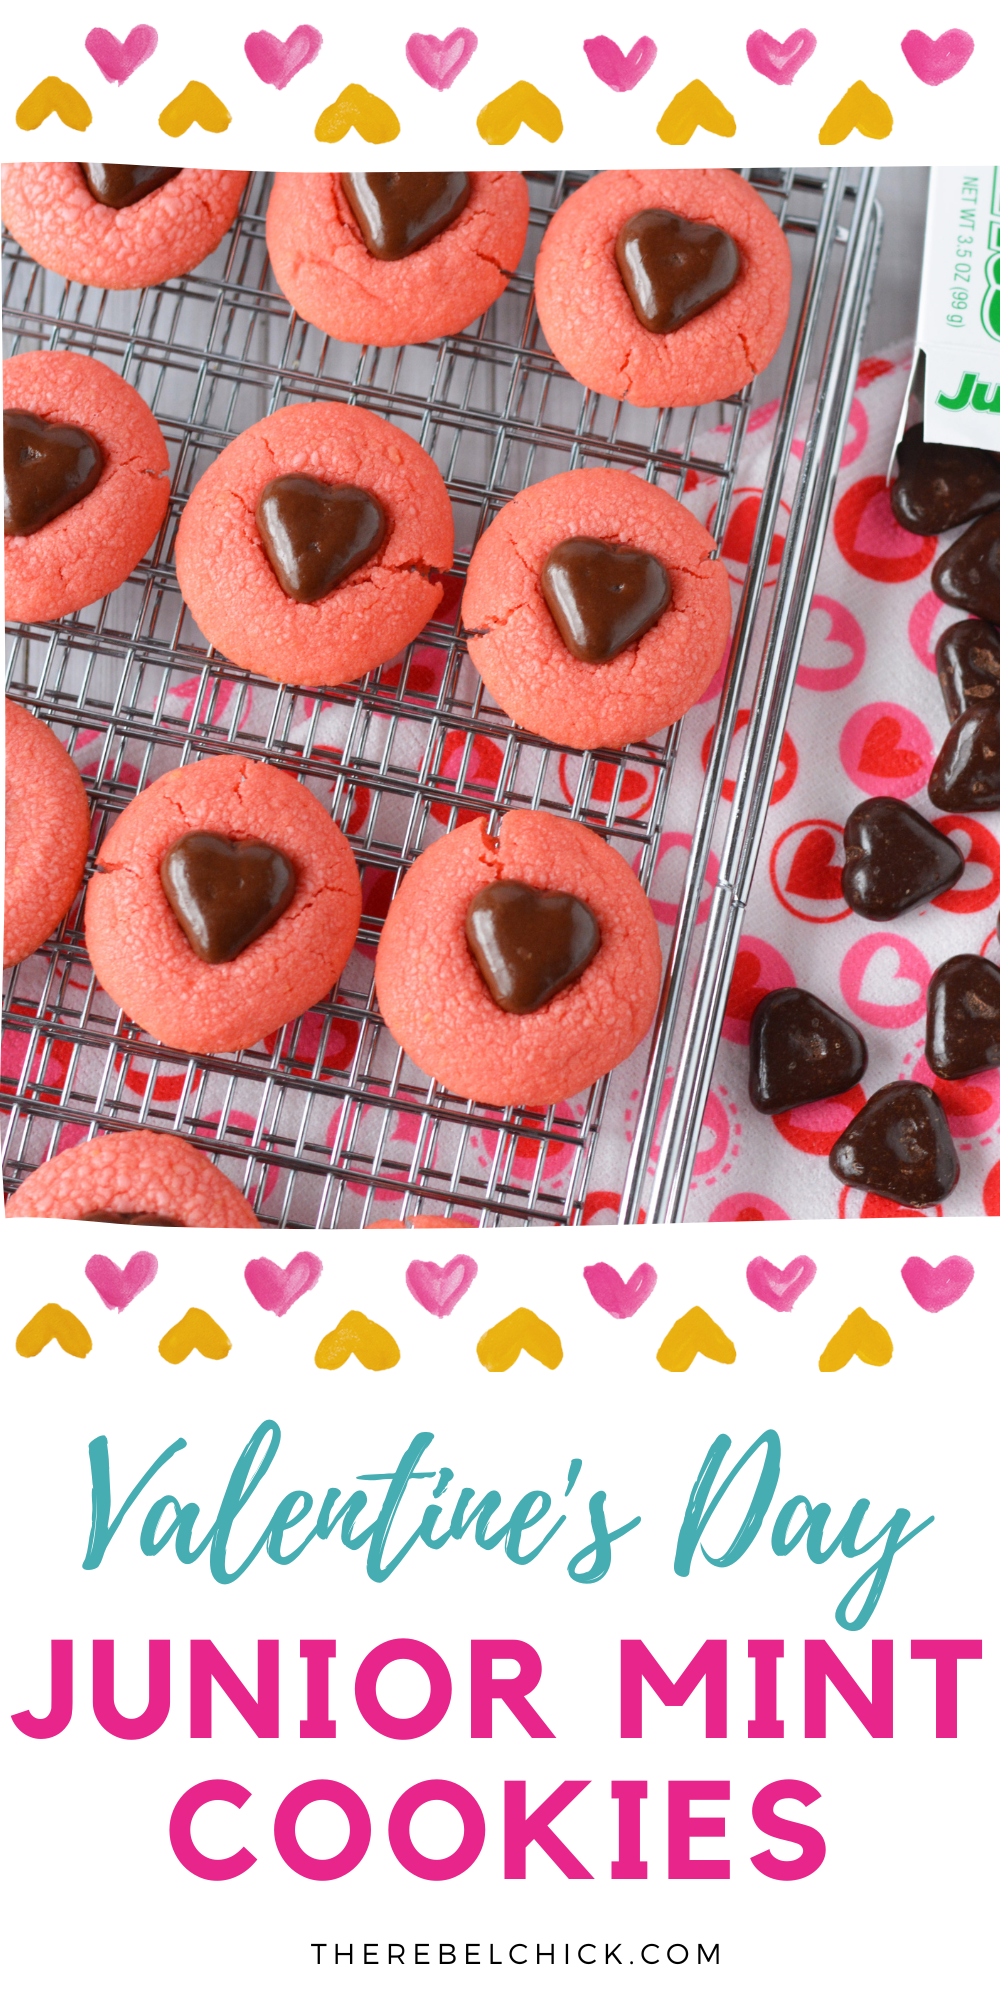 Junior Mint Cookies Recipe for Valentine's Day